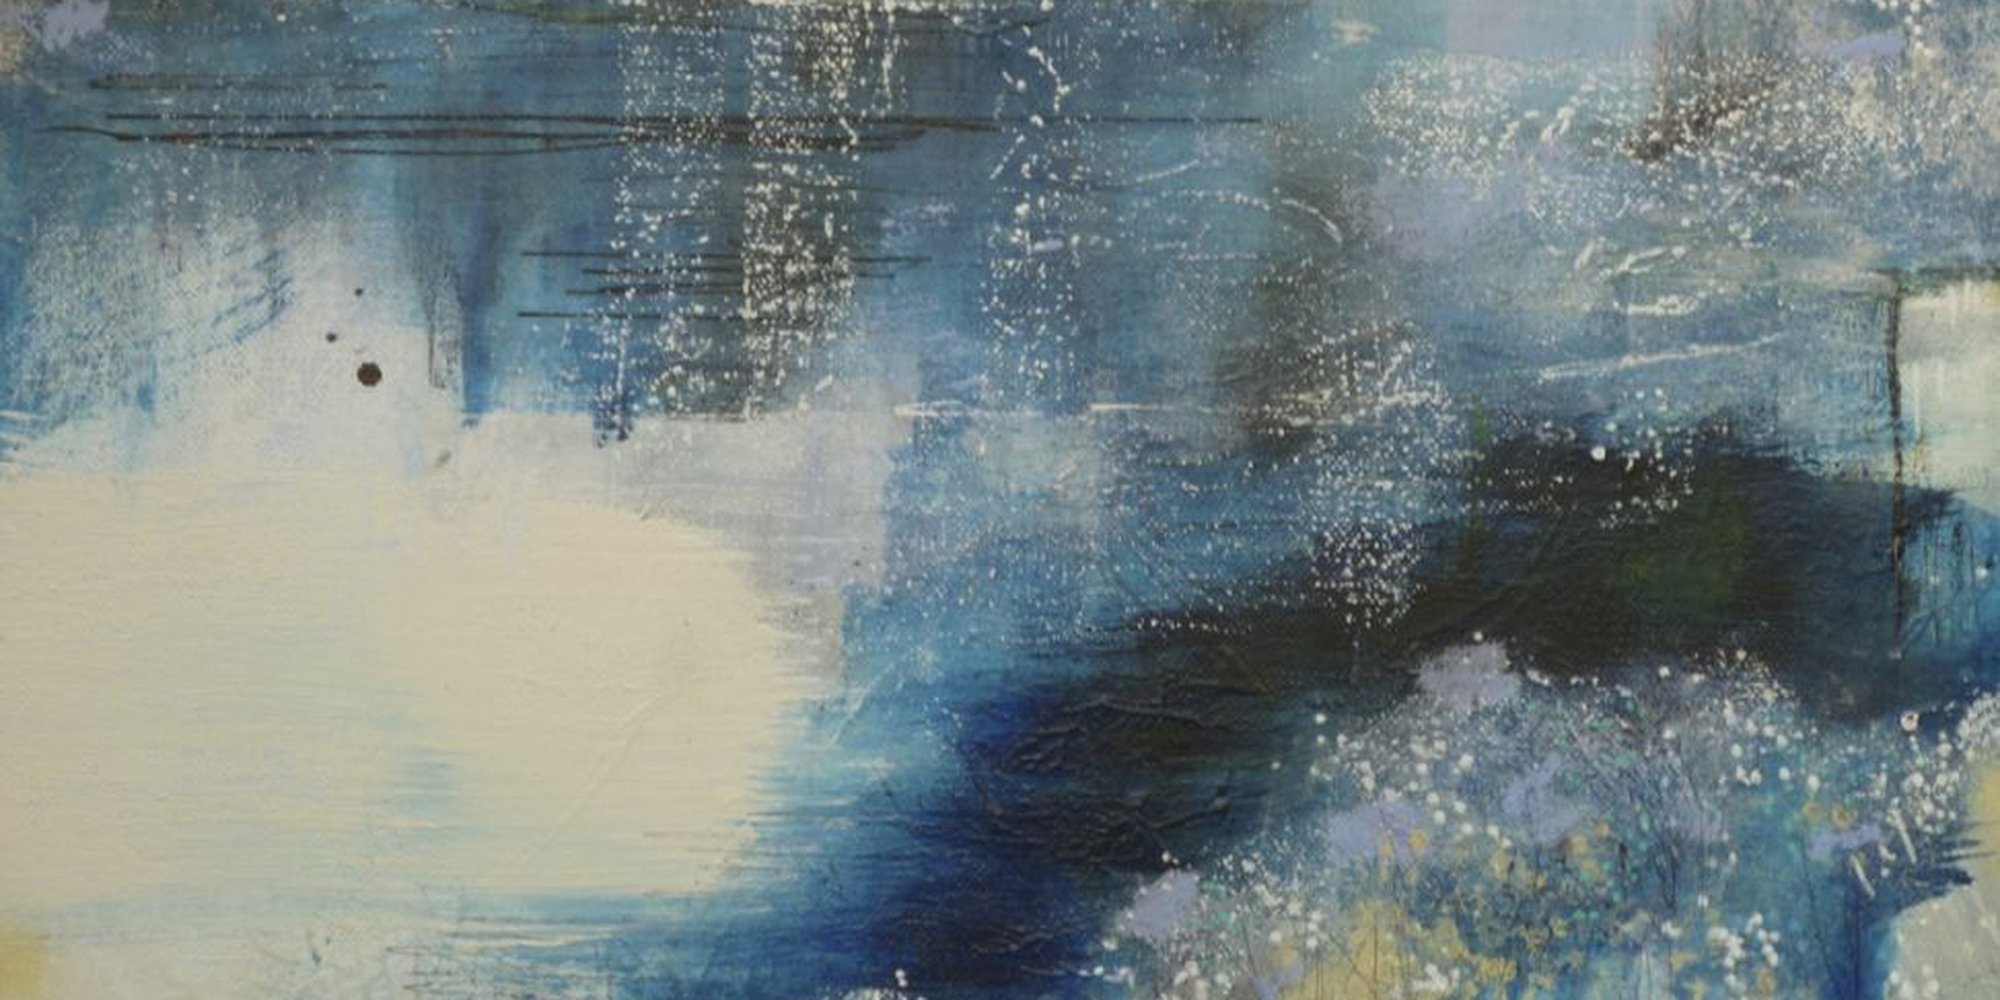 Art of the Day: "Mist rising, 2016" by Lorraine Tuck